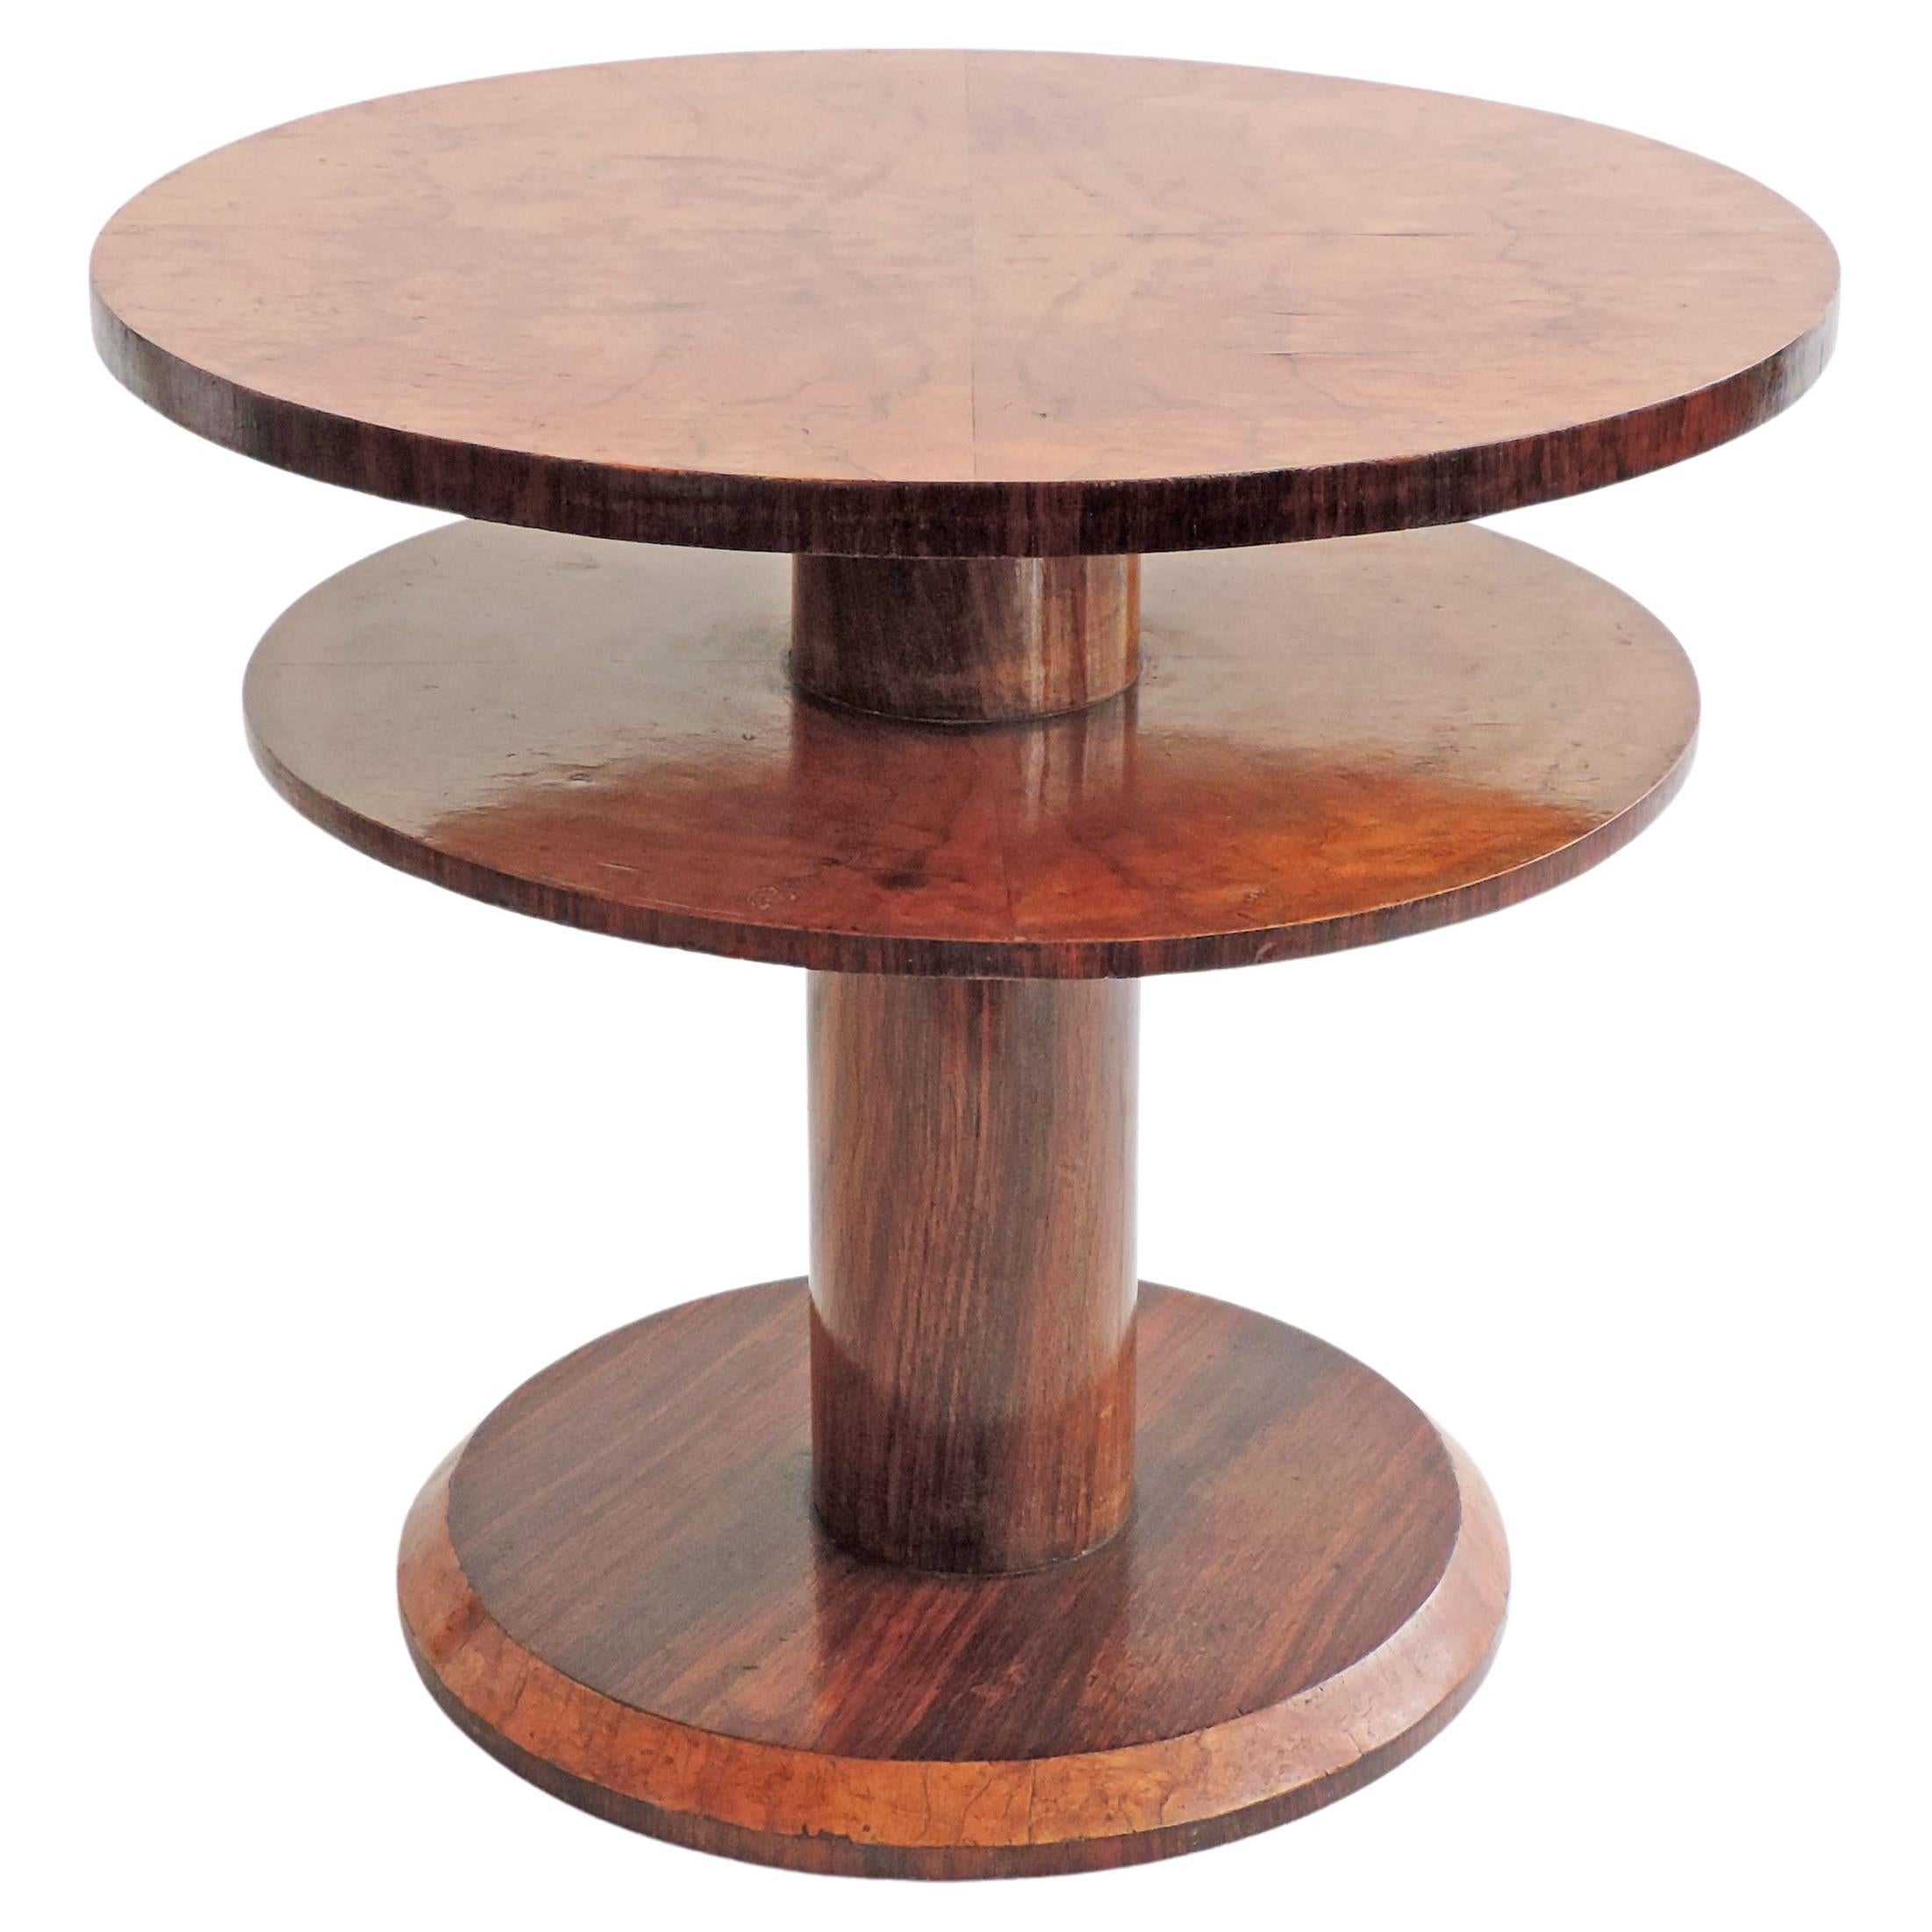 Italian 1930s Two-Tier Round Wooden Coffee Table Attributed to Gio Ponti